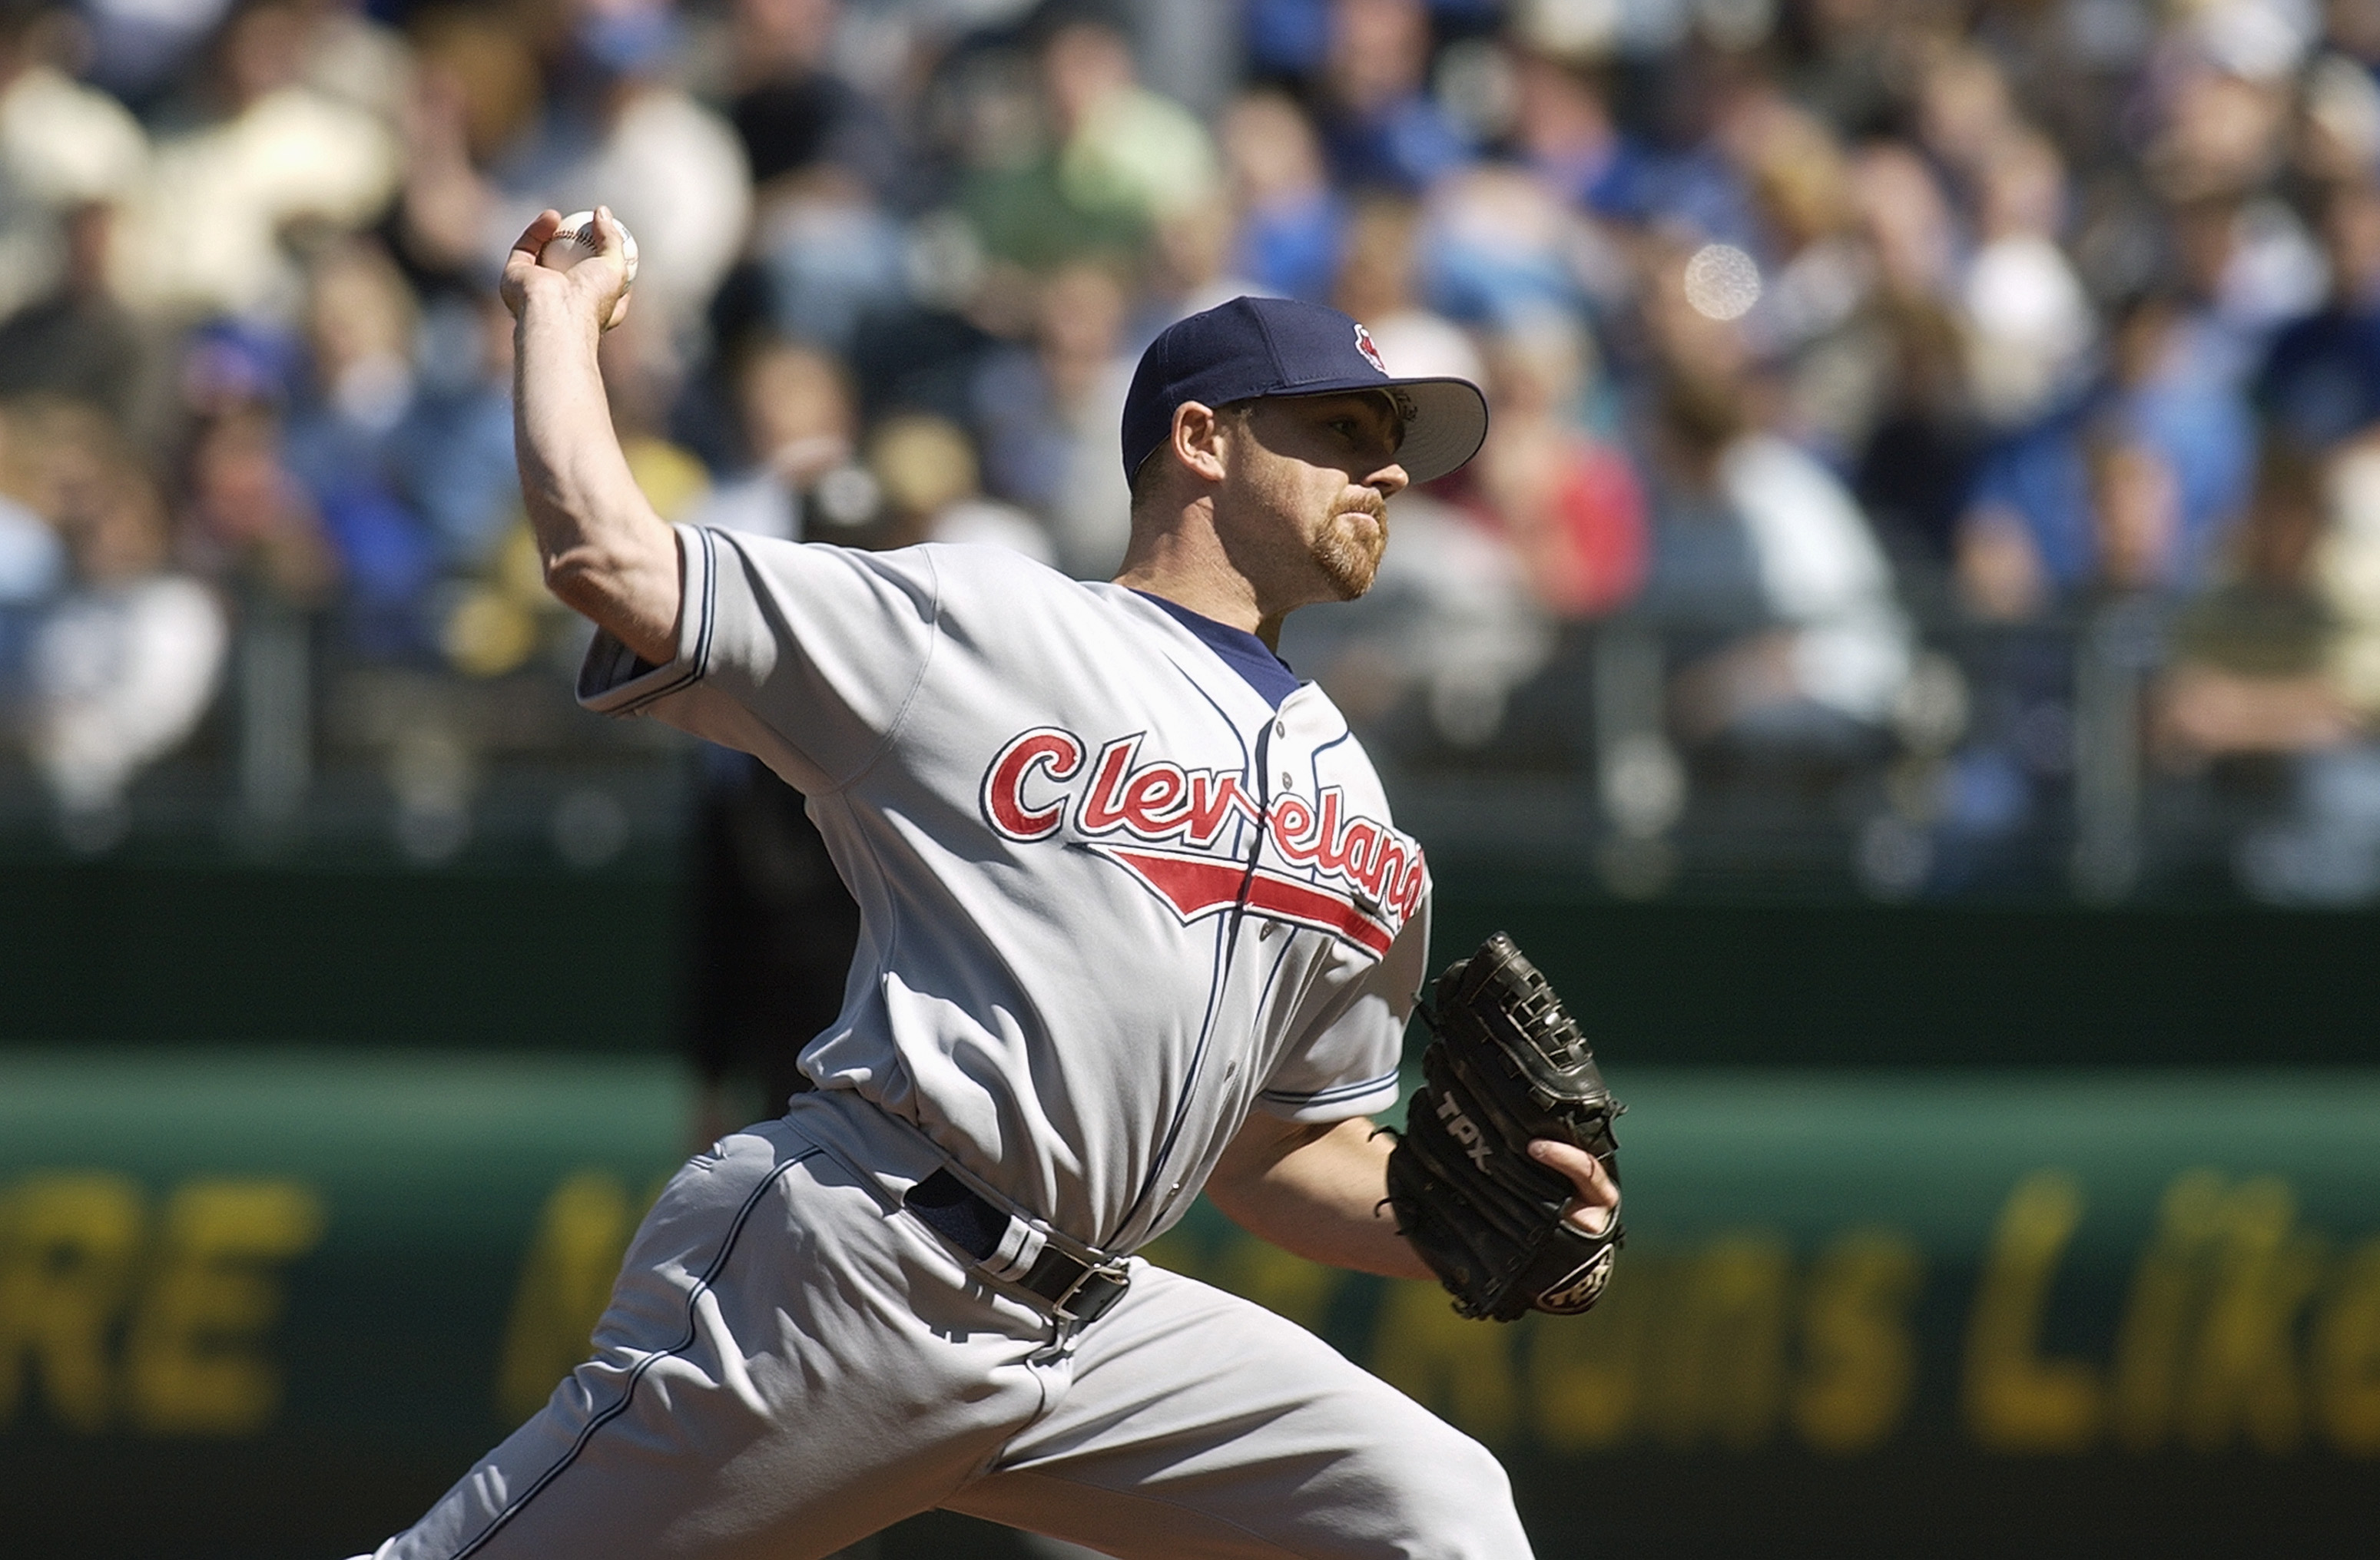 Jack Cressend, seen here pitching for the Indians in 2004, is the Dodgers' new pitching crosschecker.